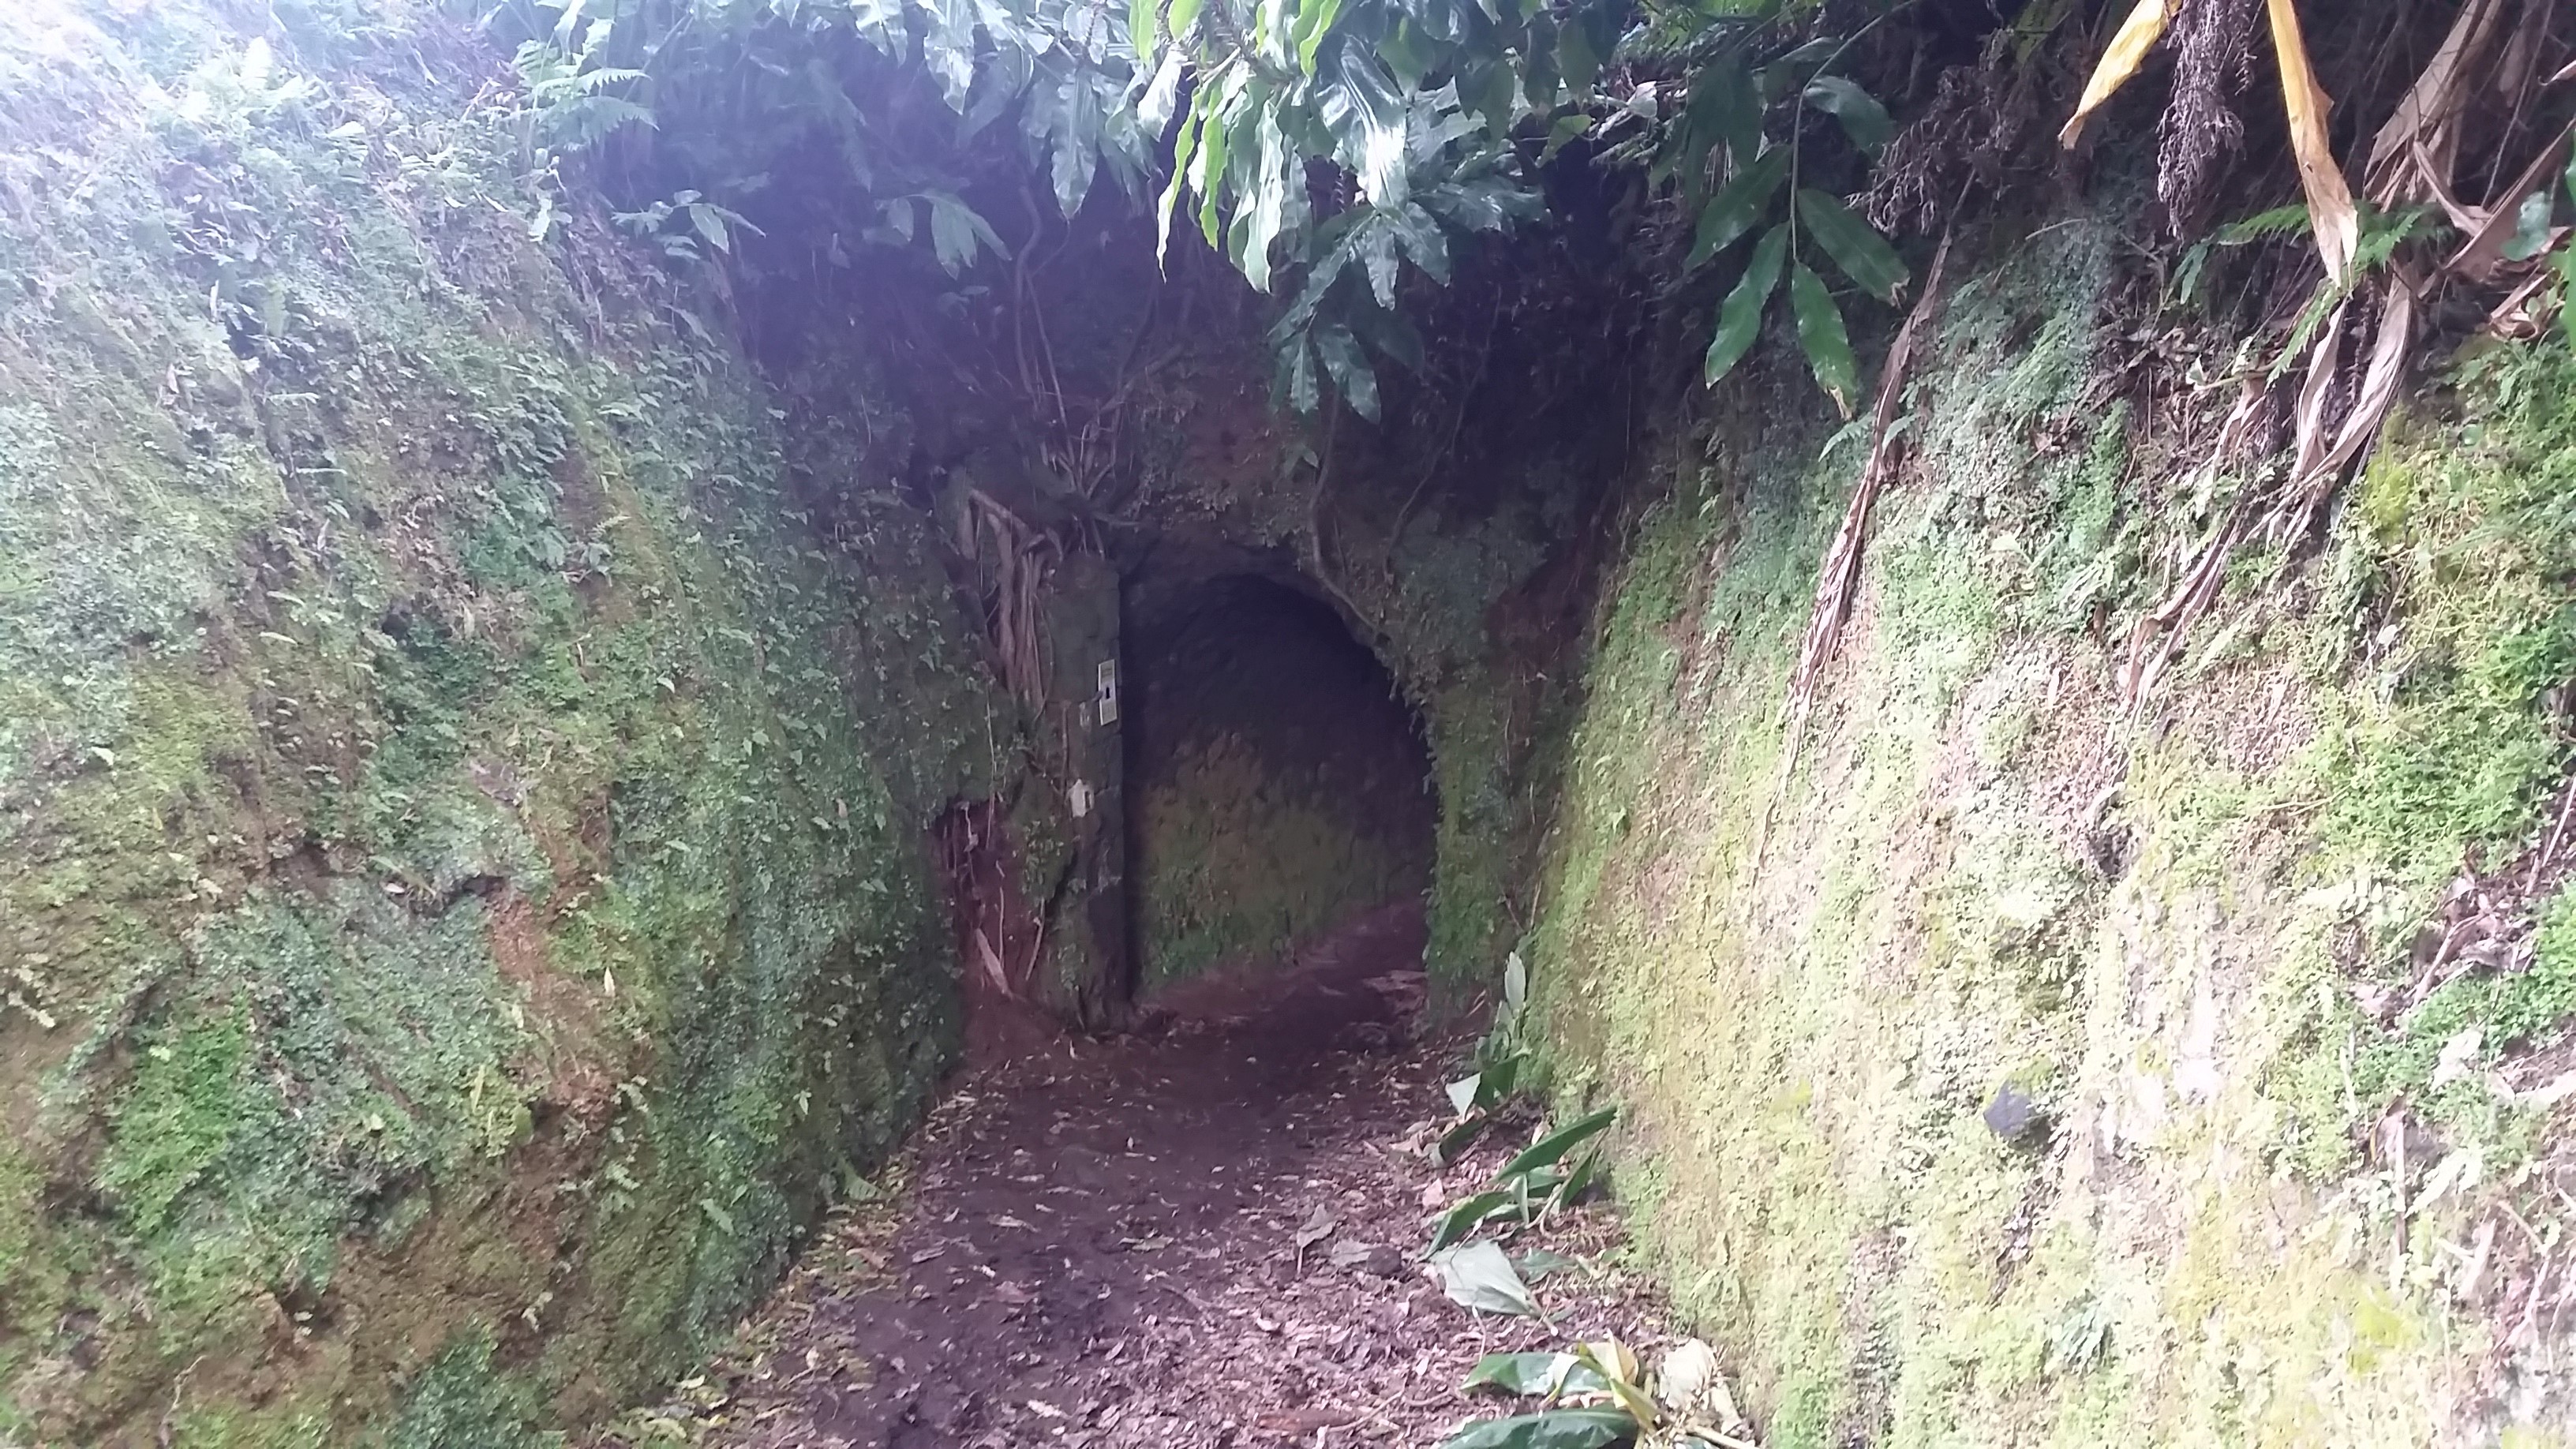 Tunel on the trail